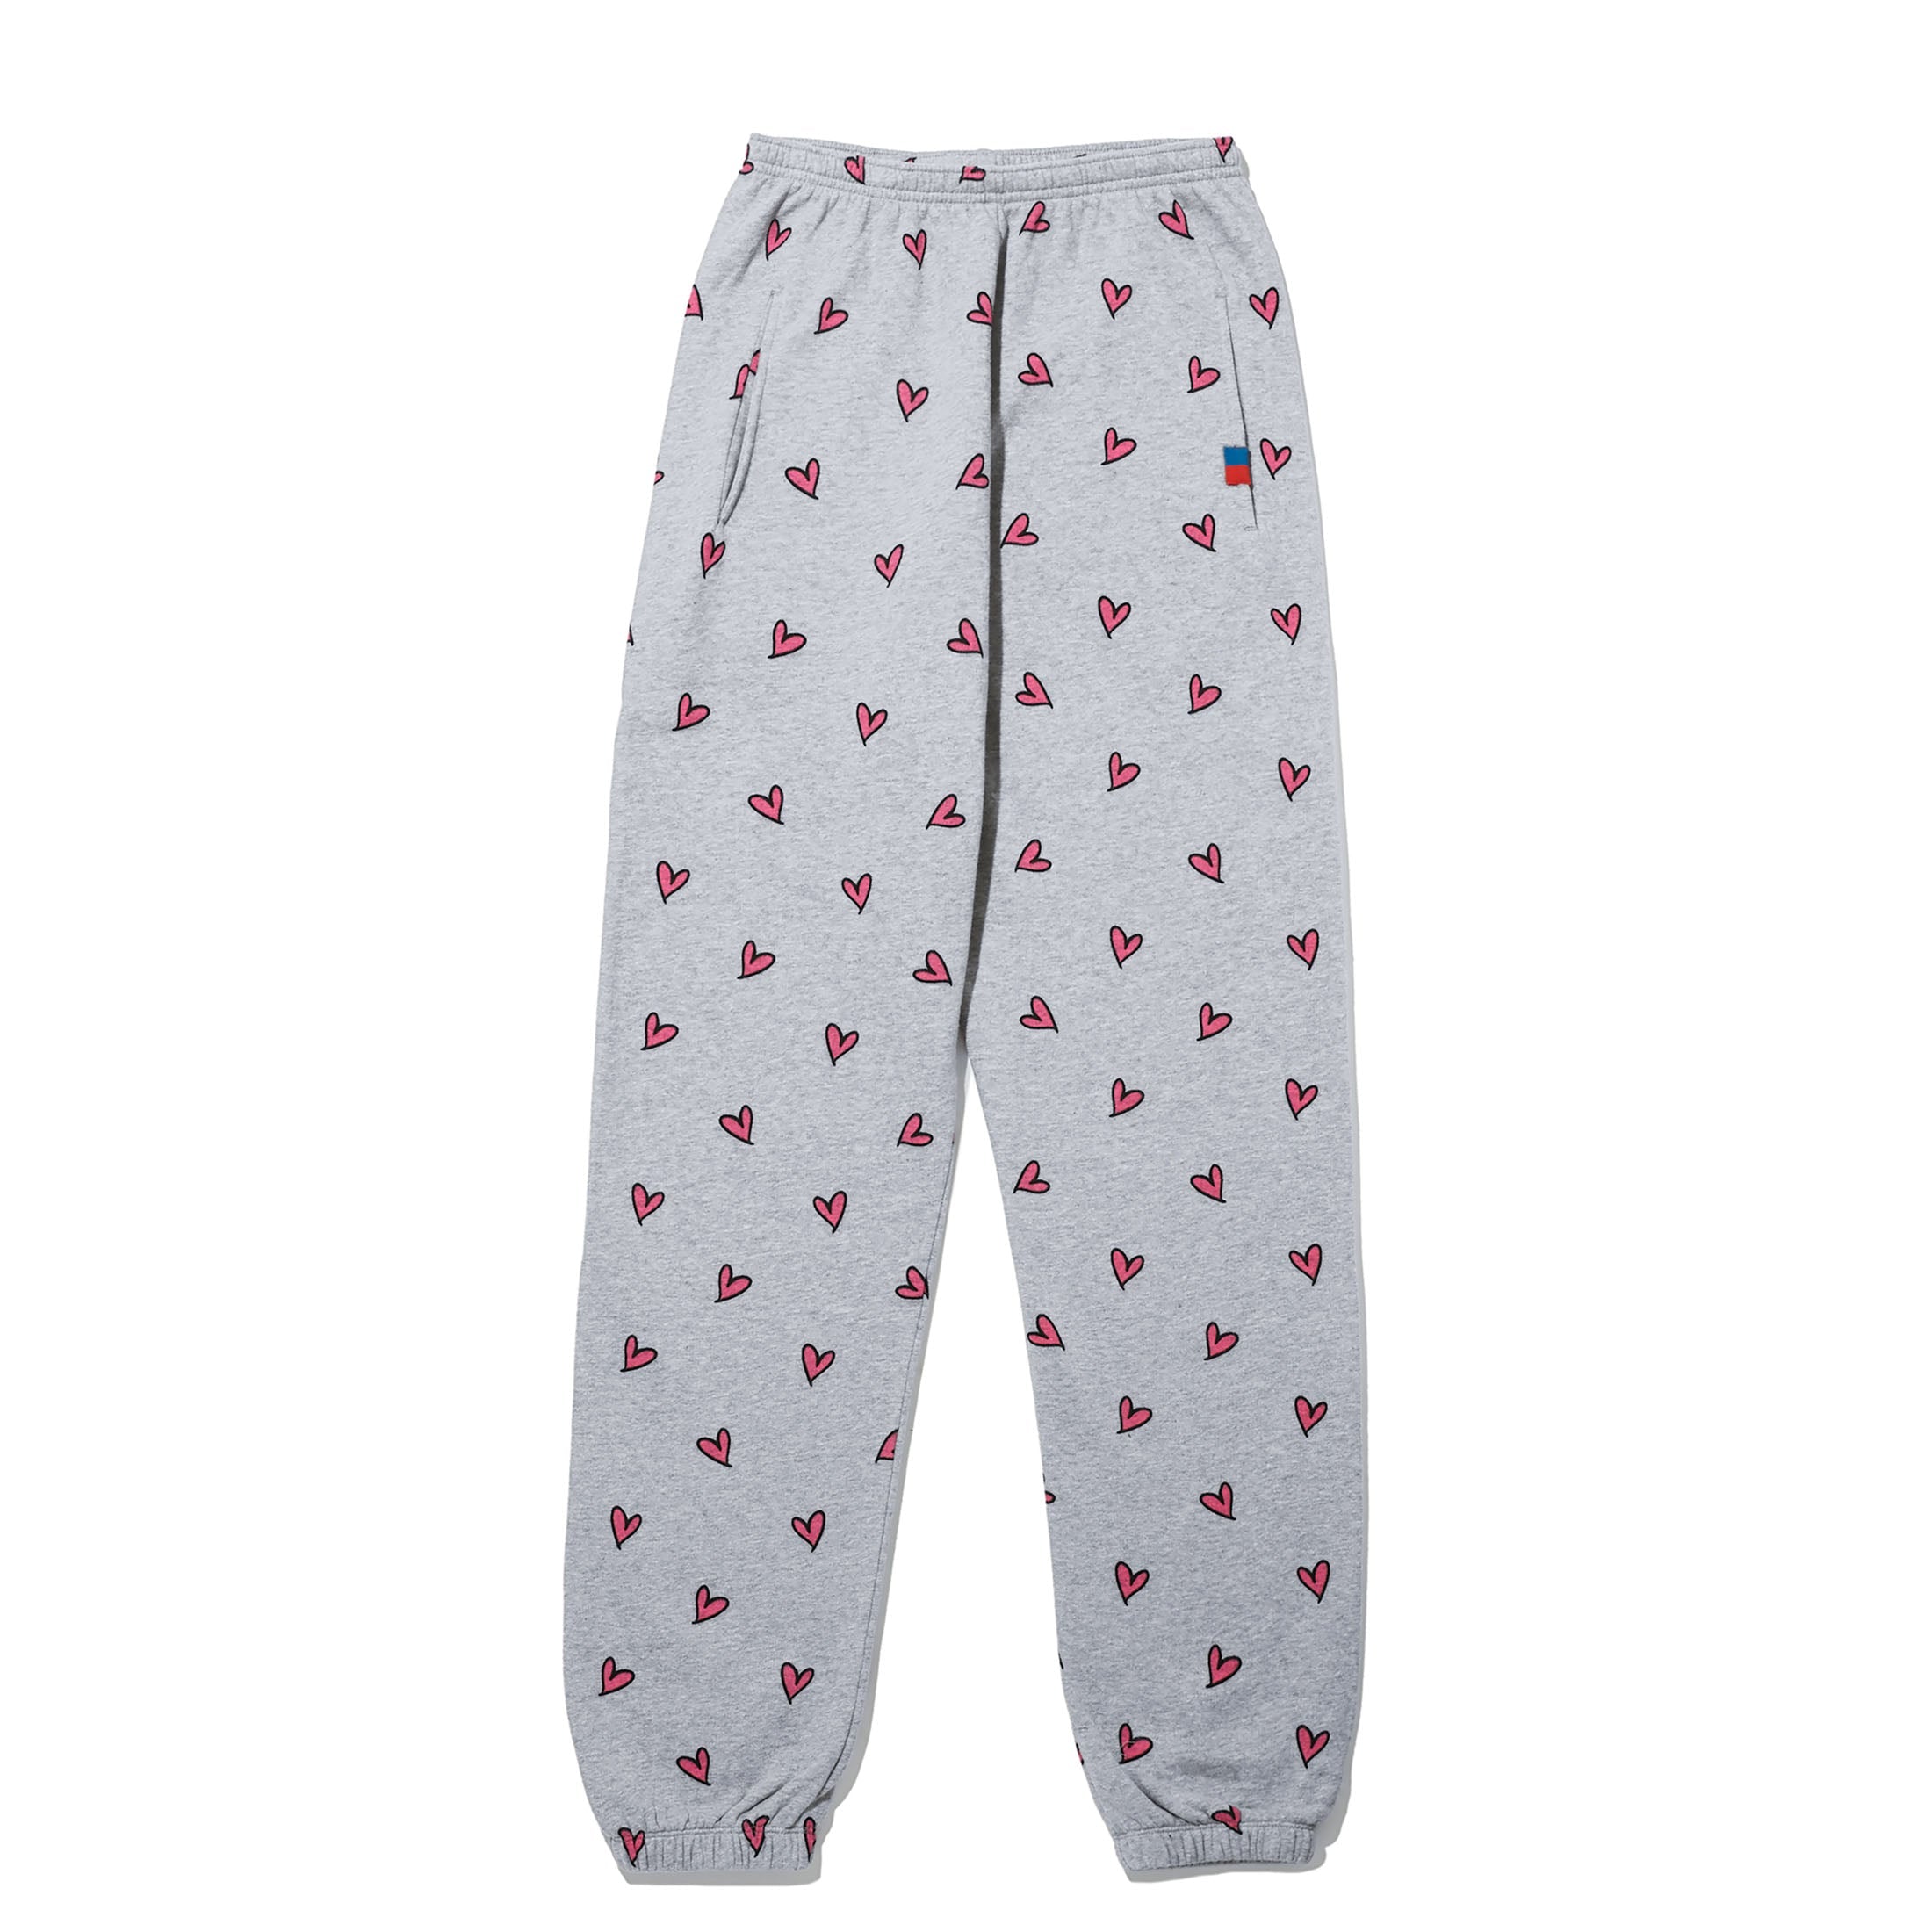 The All Over Heart Sweatpants - Heather Grey/Pink